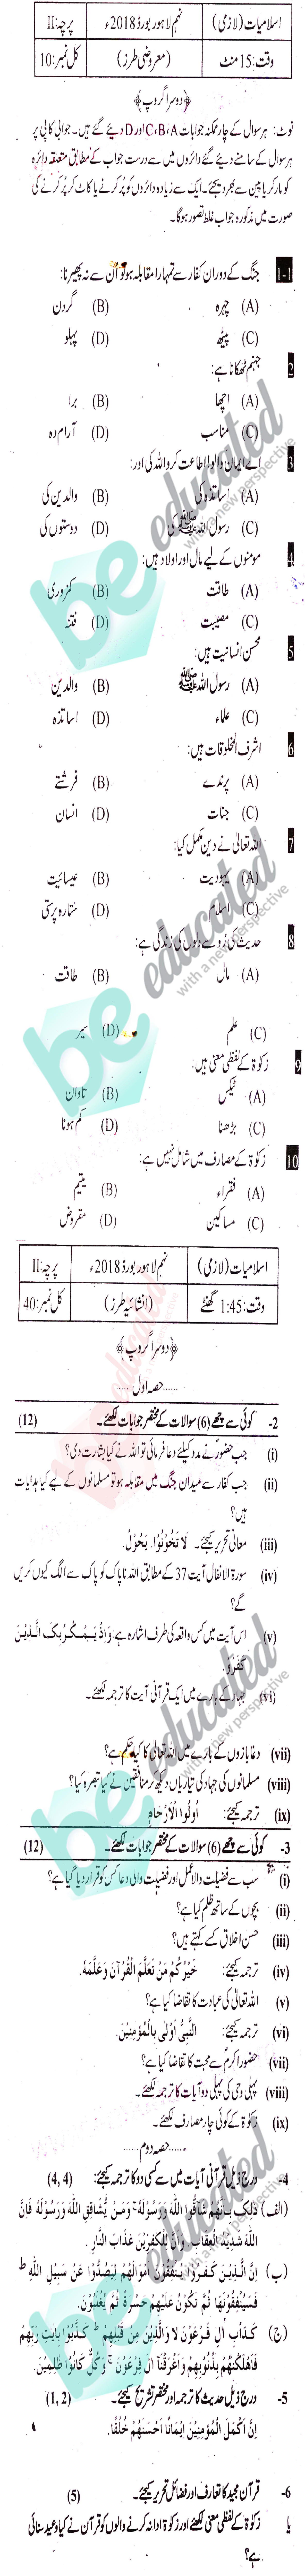 Islamiat (Compulsory) 9th class Past Paper Group 2 BISE Lahore 2018